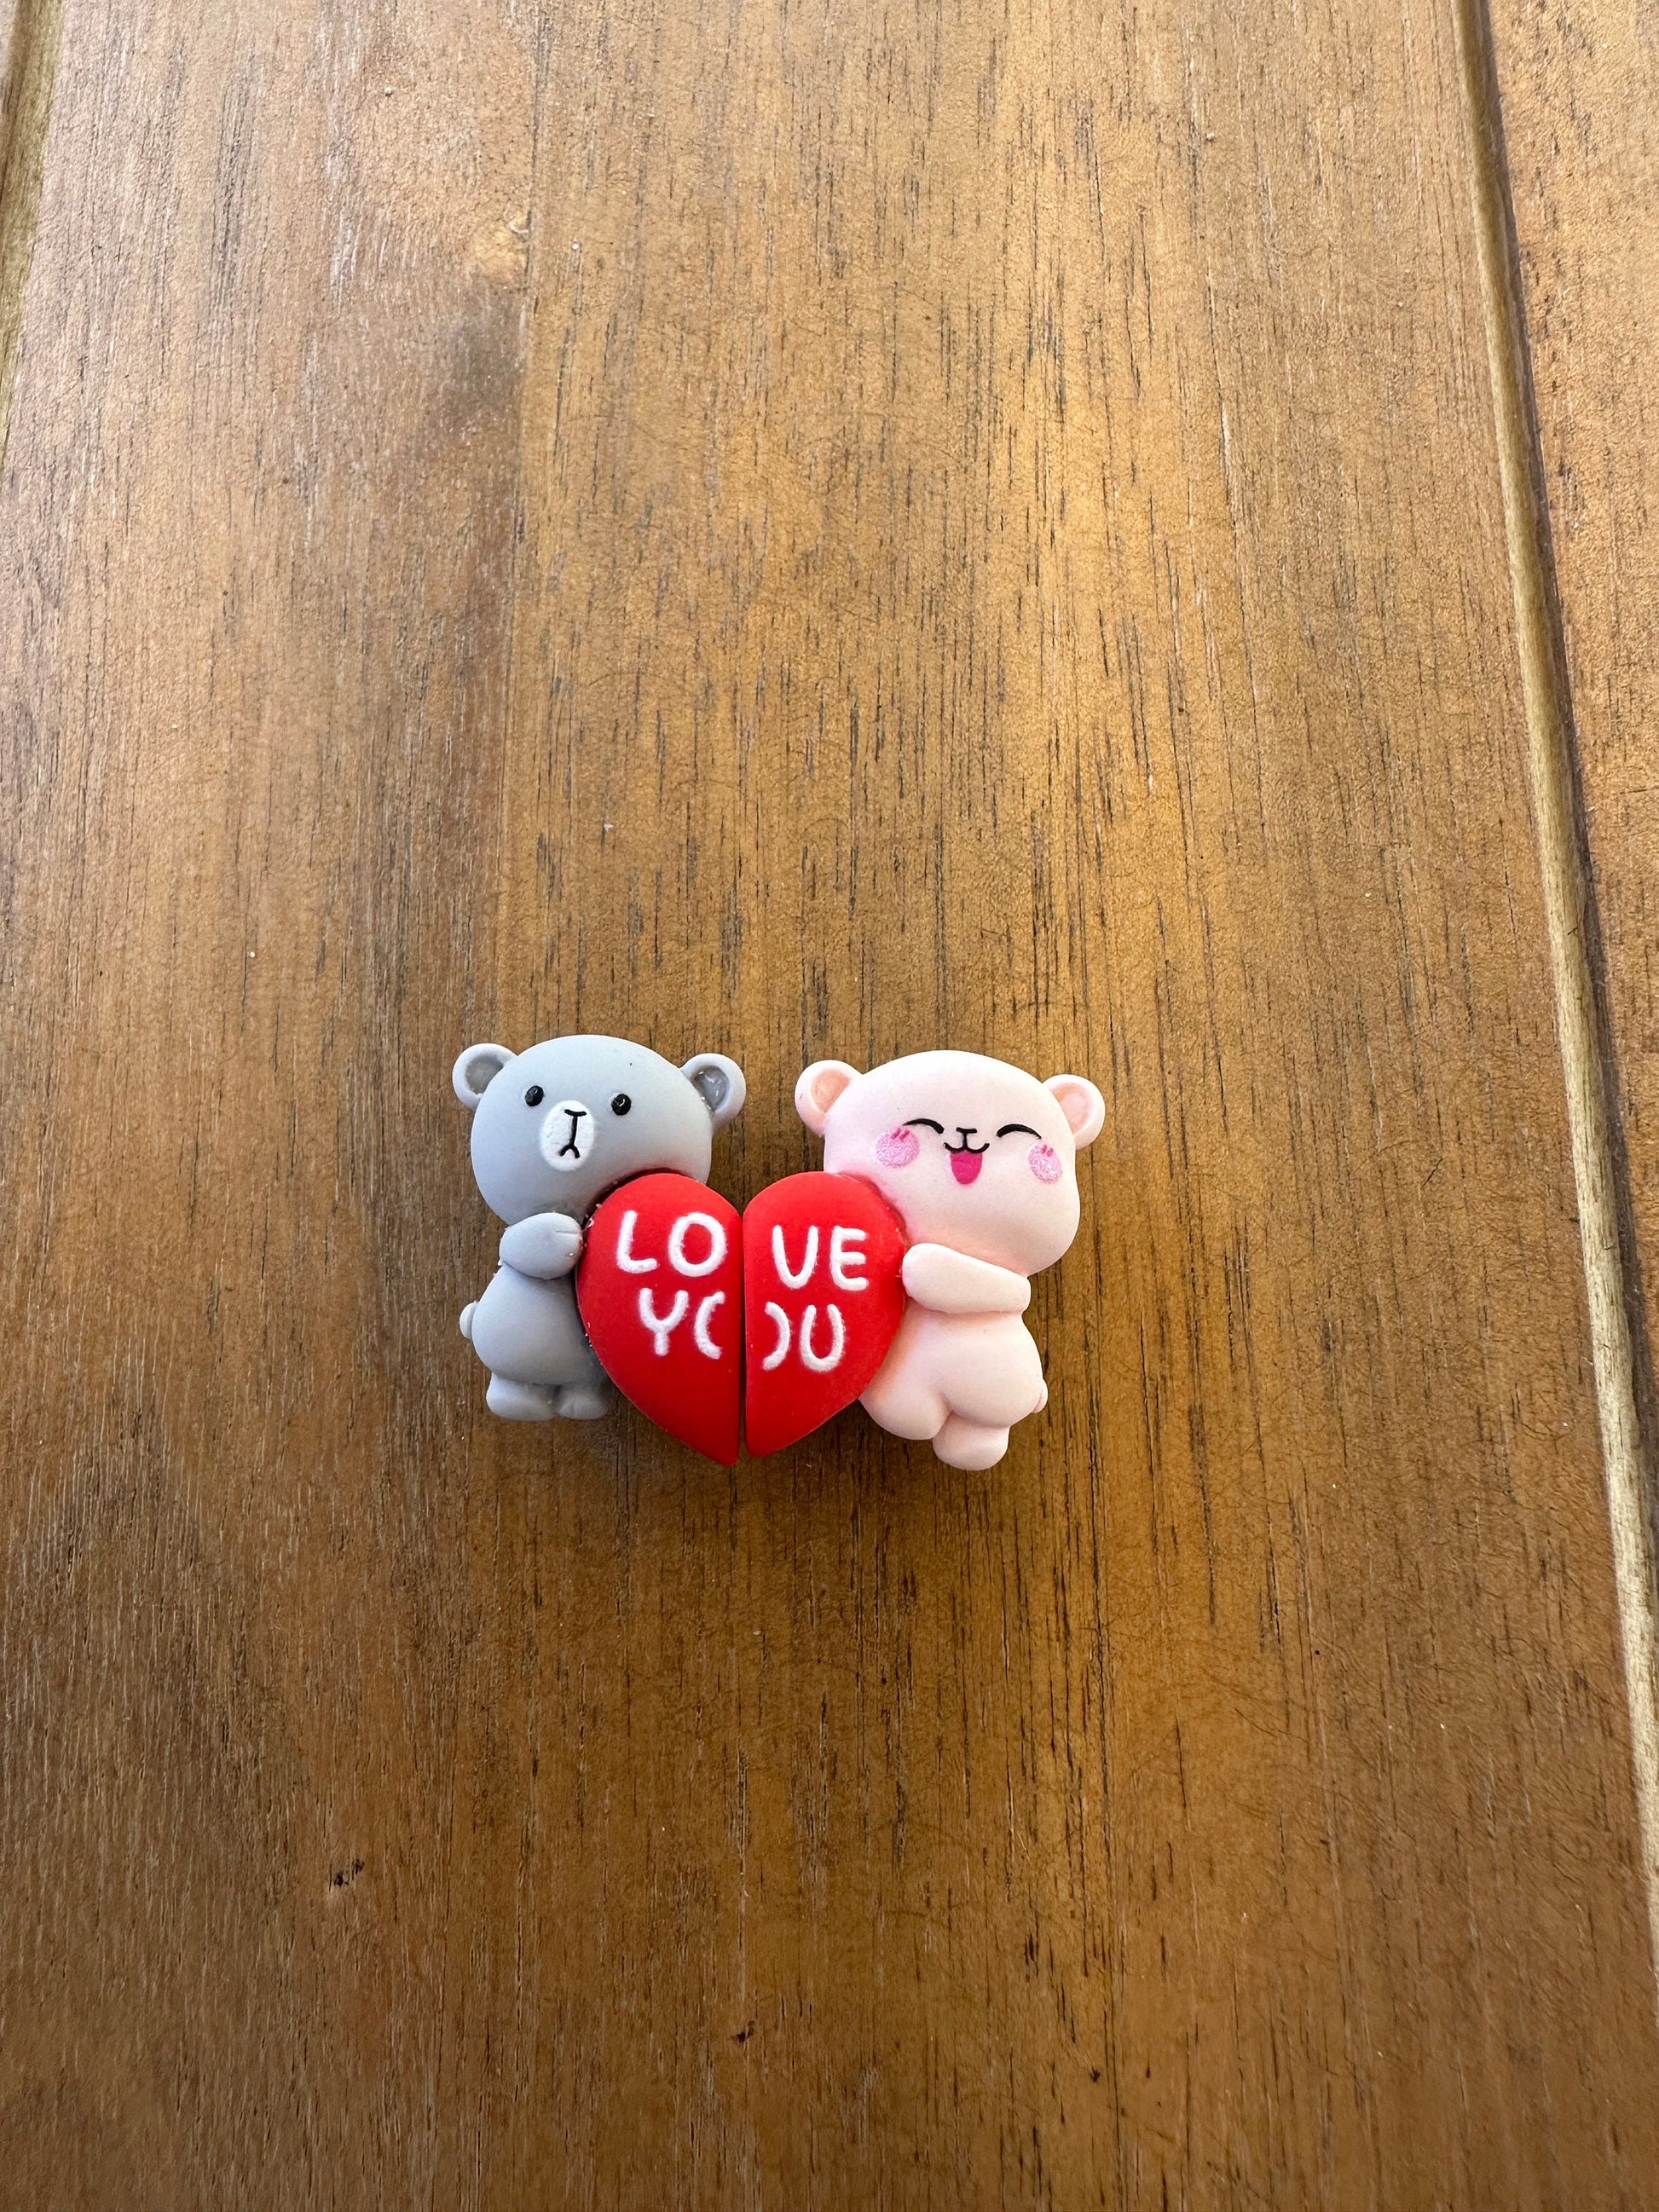 Love | Love bears | Gift for Couples | His and Hers | Shoe charms | Couples | Love you | Hearts | you & me | Shoe charms | Kawaii